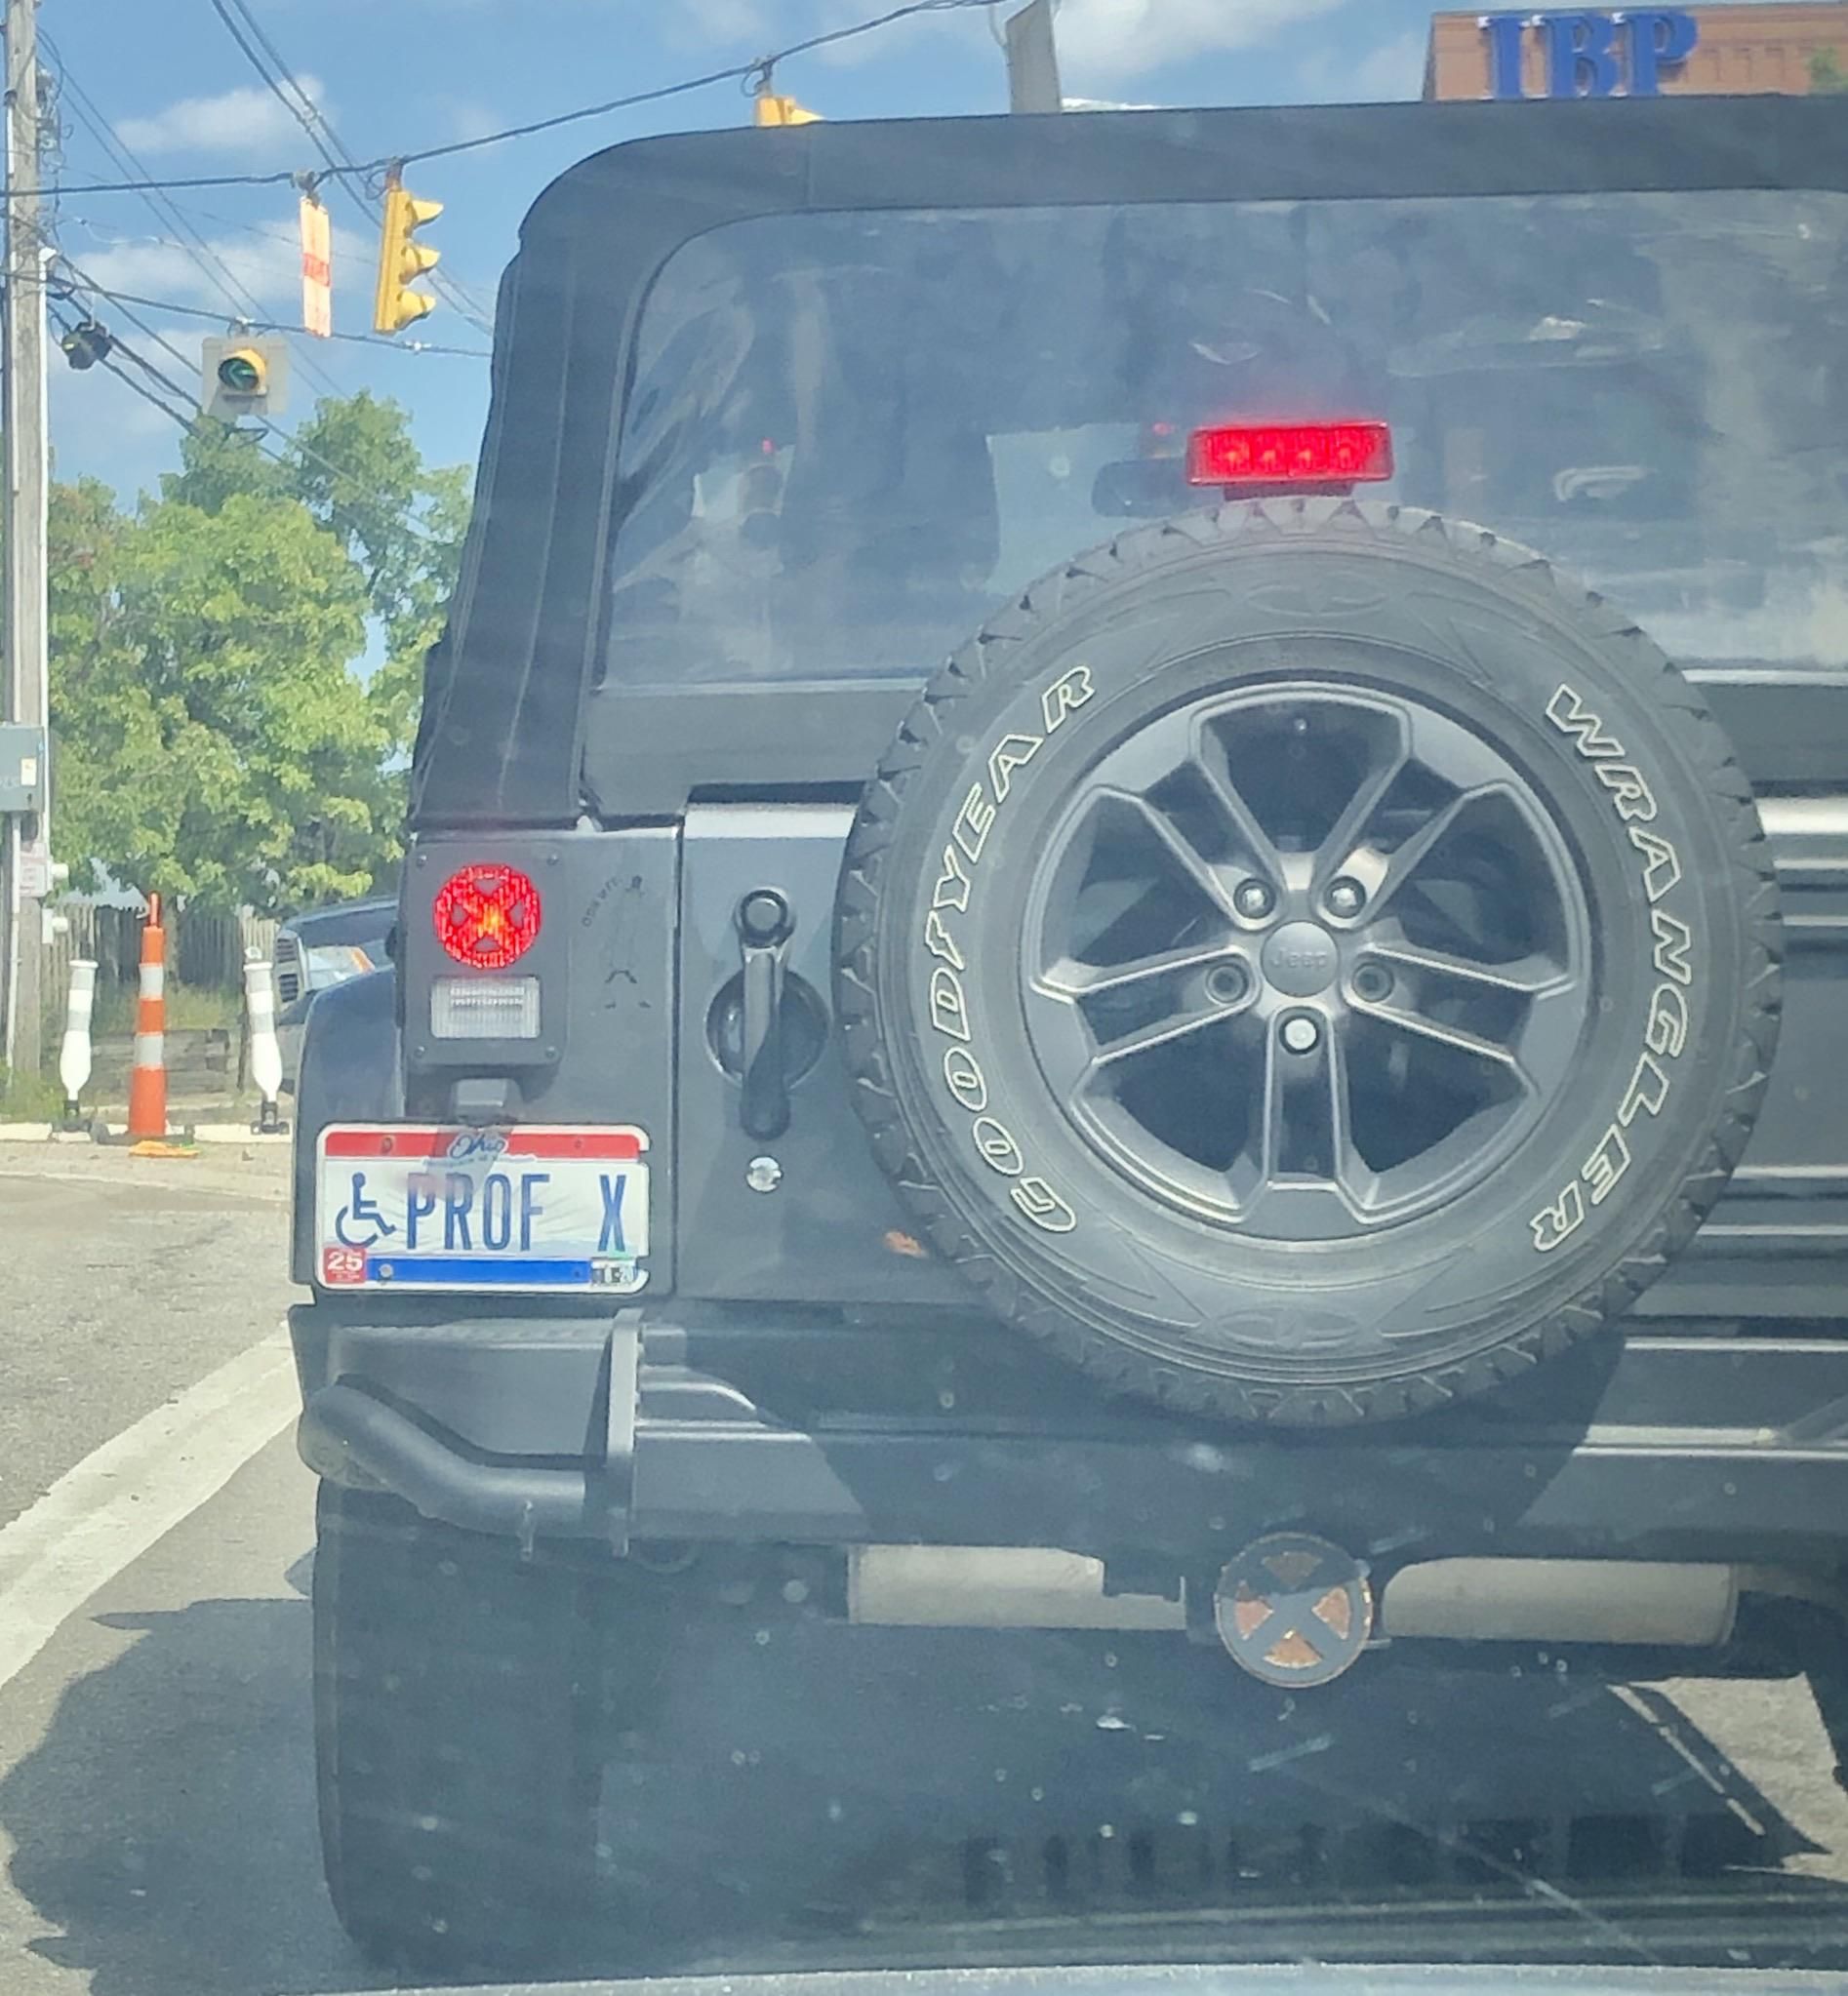 This guy’s license plate.